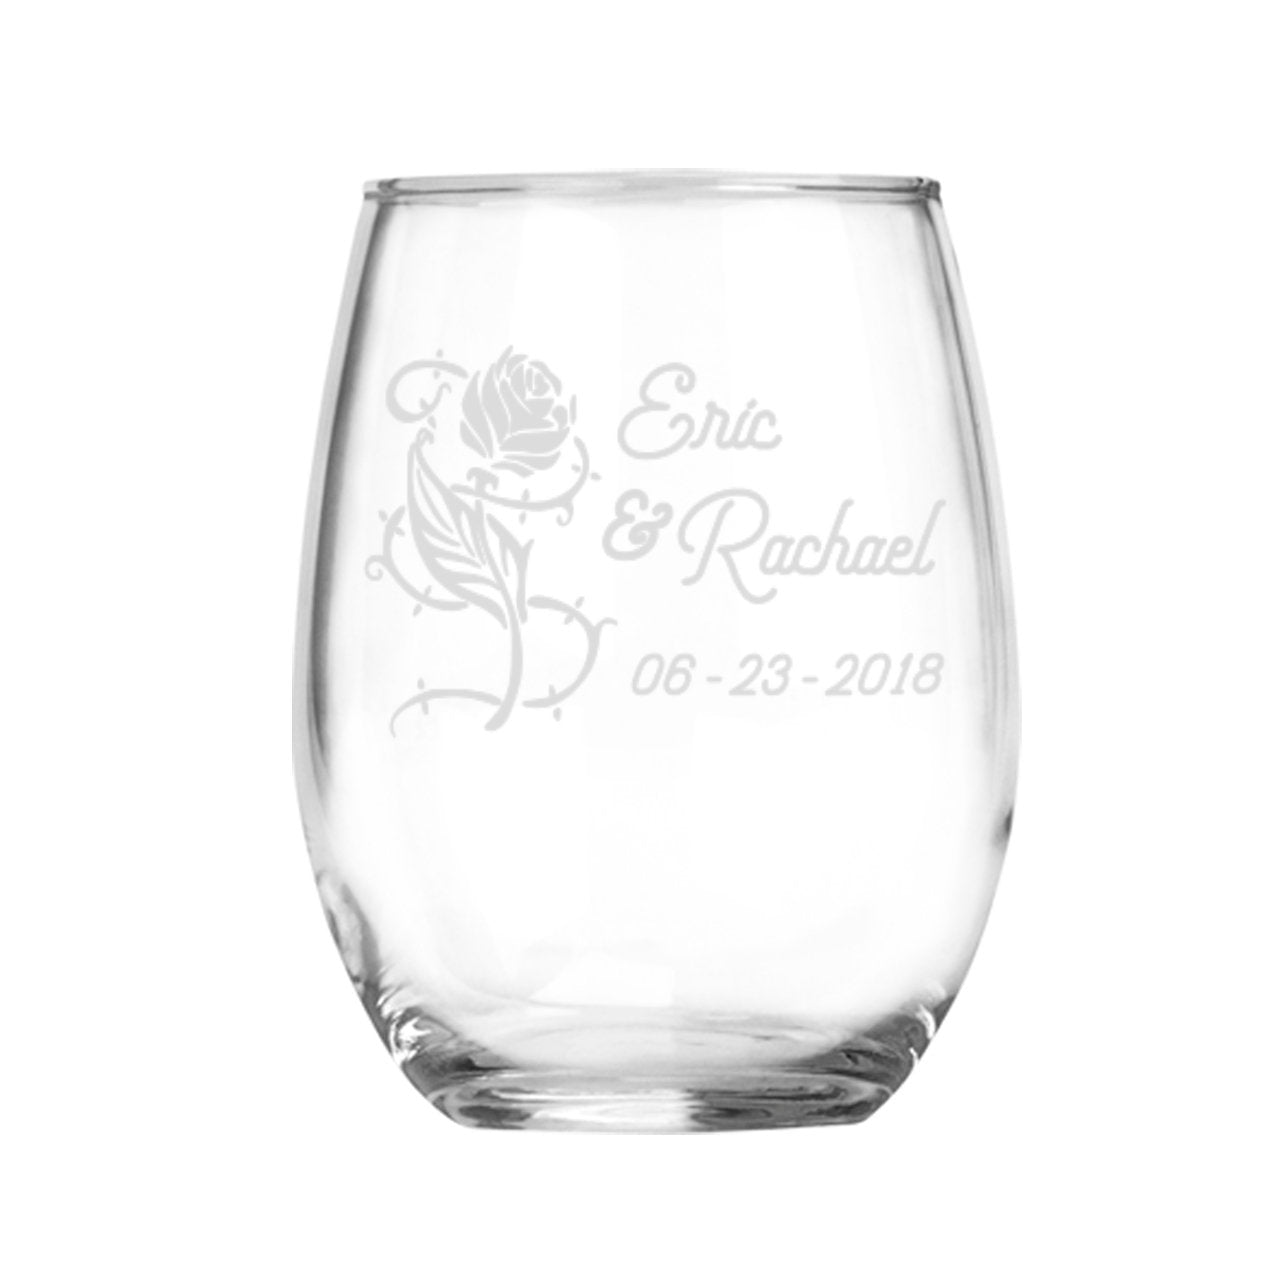 Forever Rose Personalized stemless wine glasses Engagement Anniversary Wedding Couple Gift for Couple